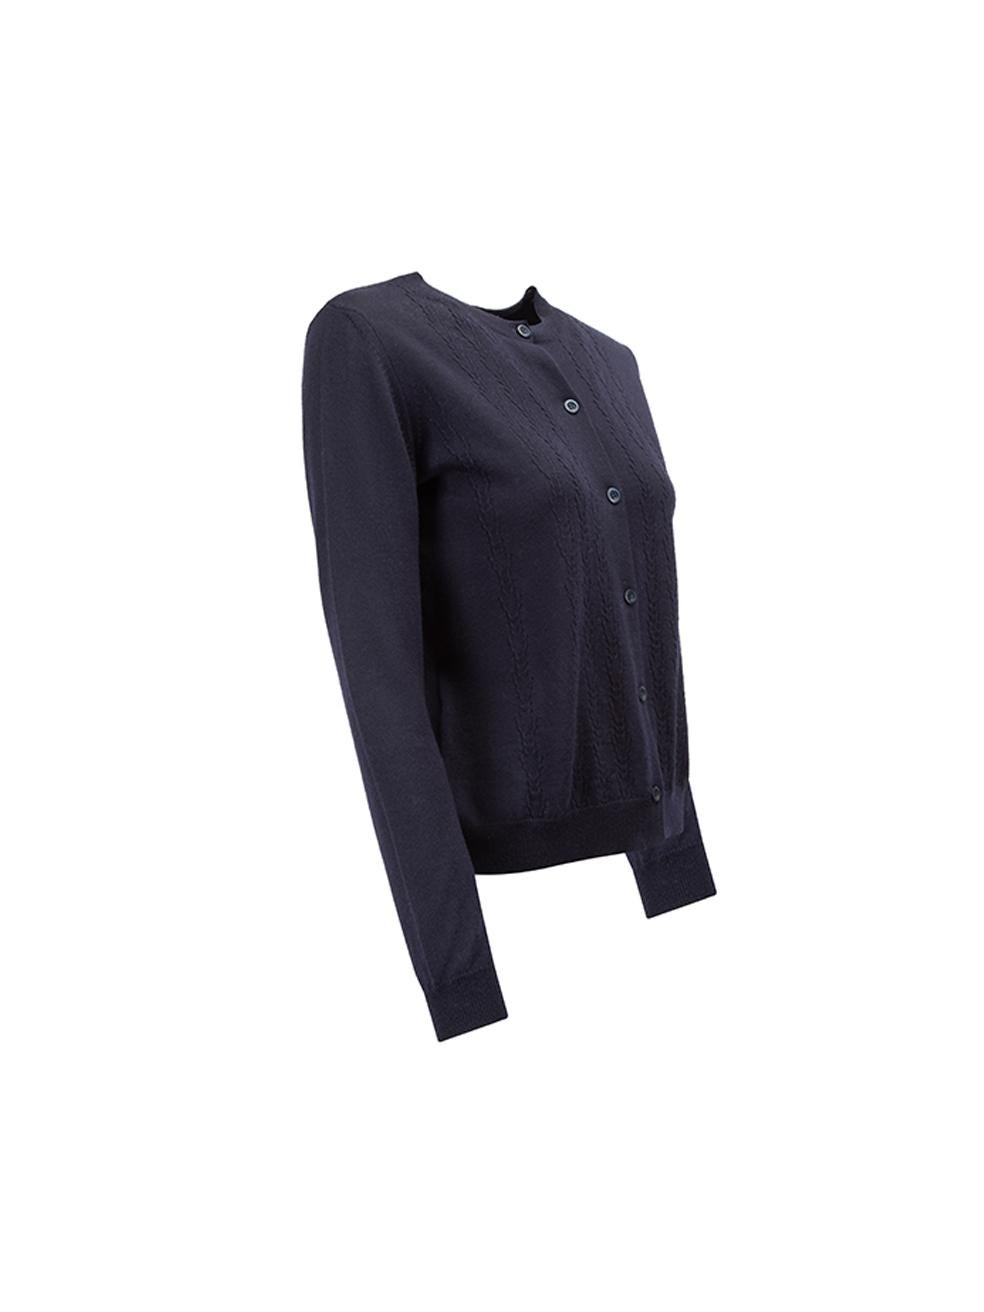 CONDITION is Very good. Minimal wear to cardigan is evident. Small hole visible aside fifth button on this used Miu Miu designer resale item.



Details


Navy

Wool

Long sleeve

Knit cardigan

Form fitting

Round neck

Front button